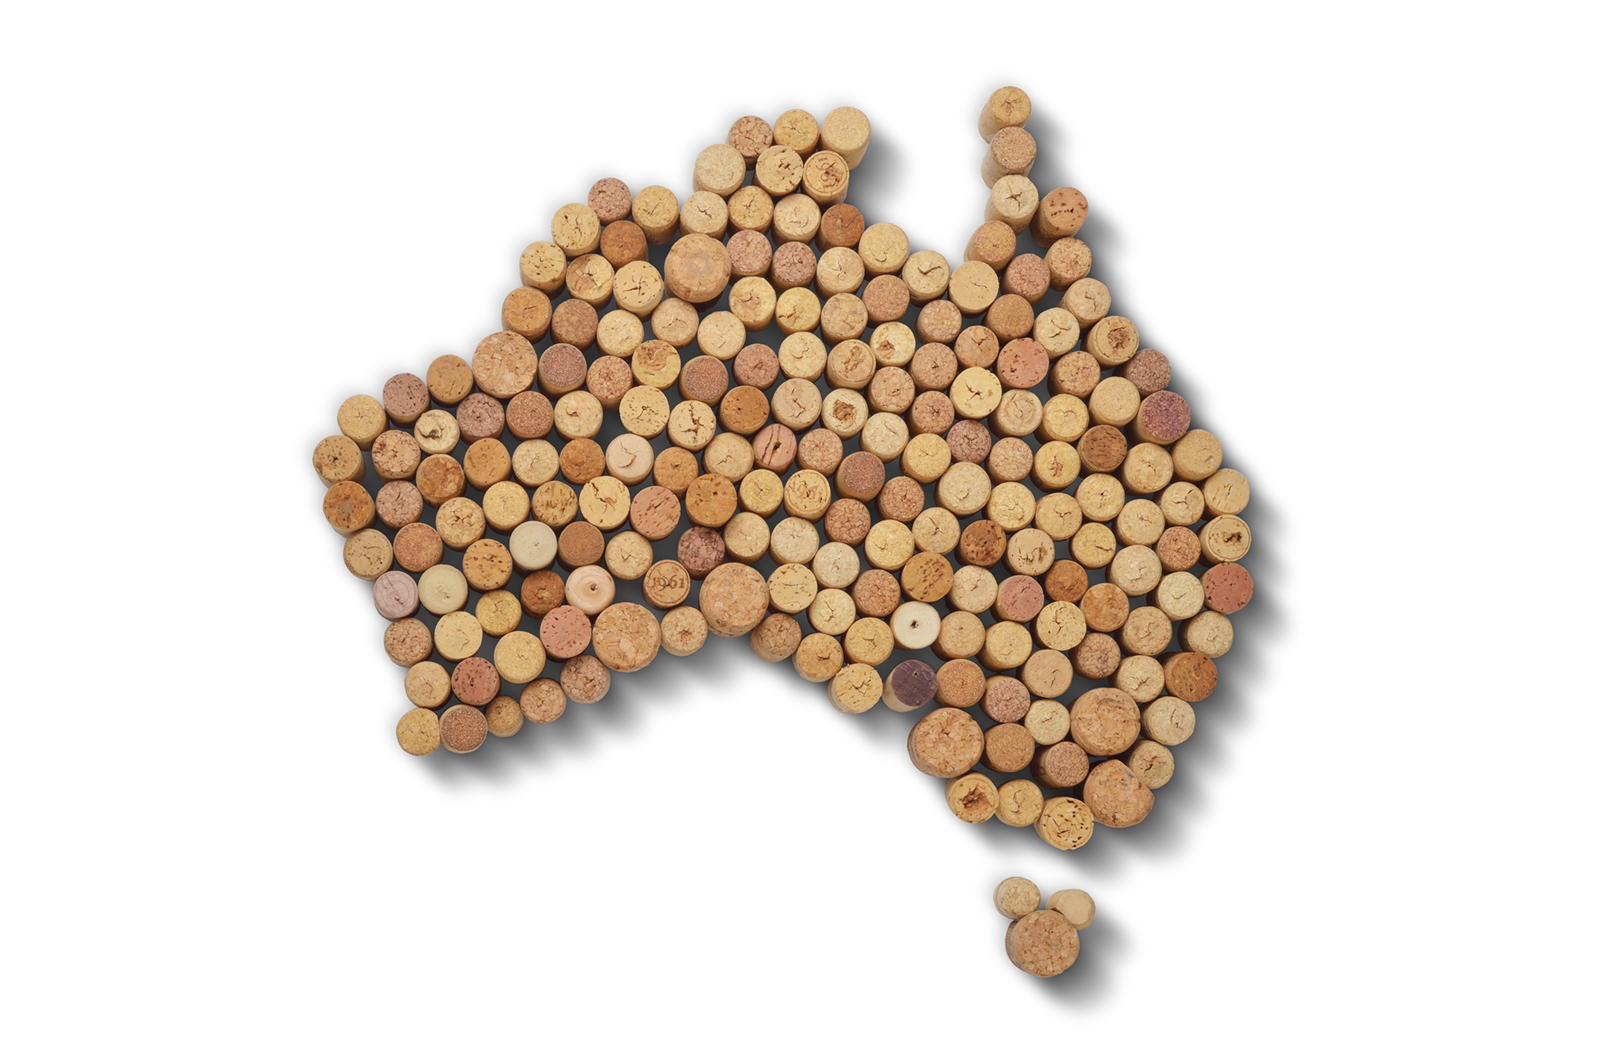 Map of Australia with wine corks